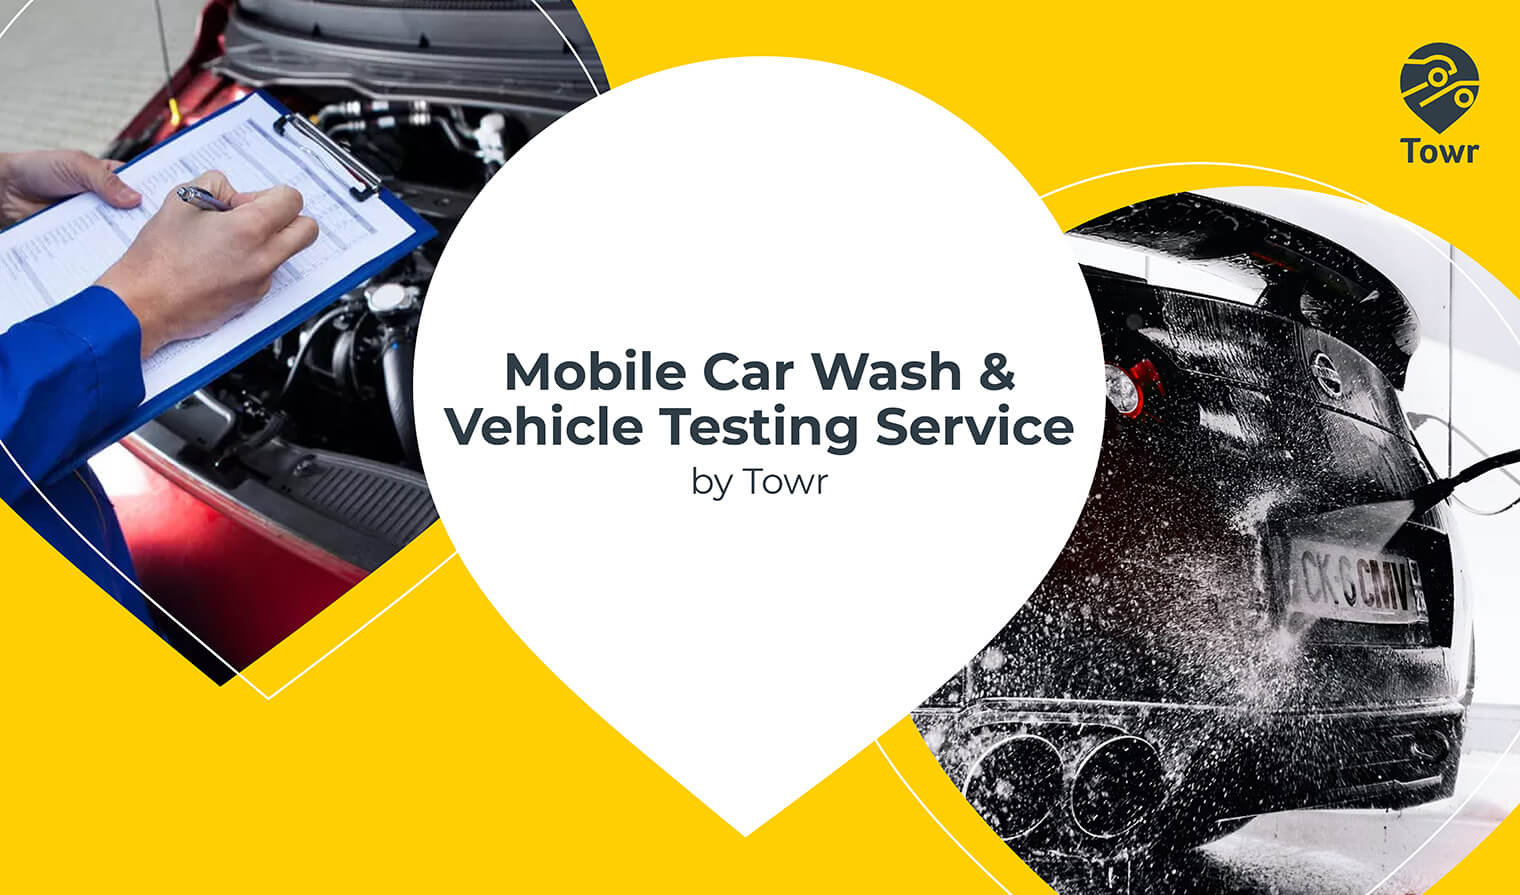 Towr Introduces Mobile Car Wash and Vehicle Testing Services